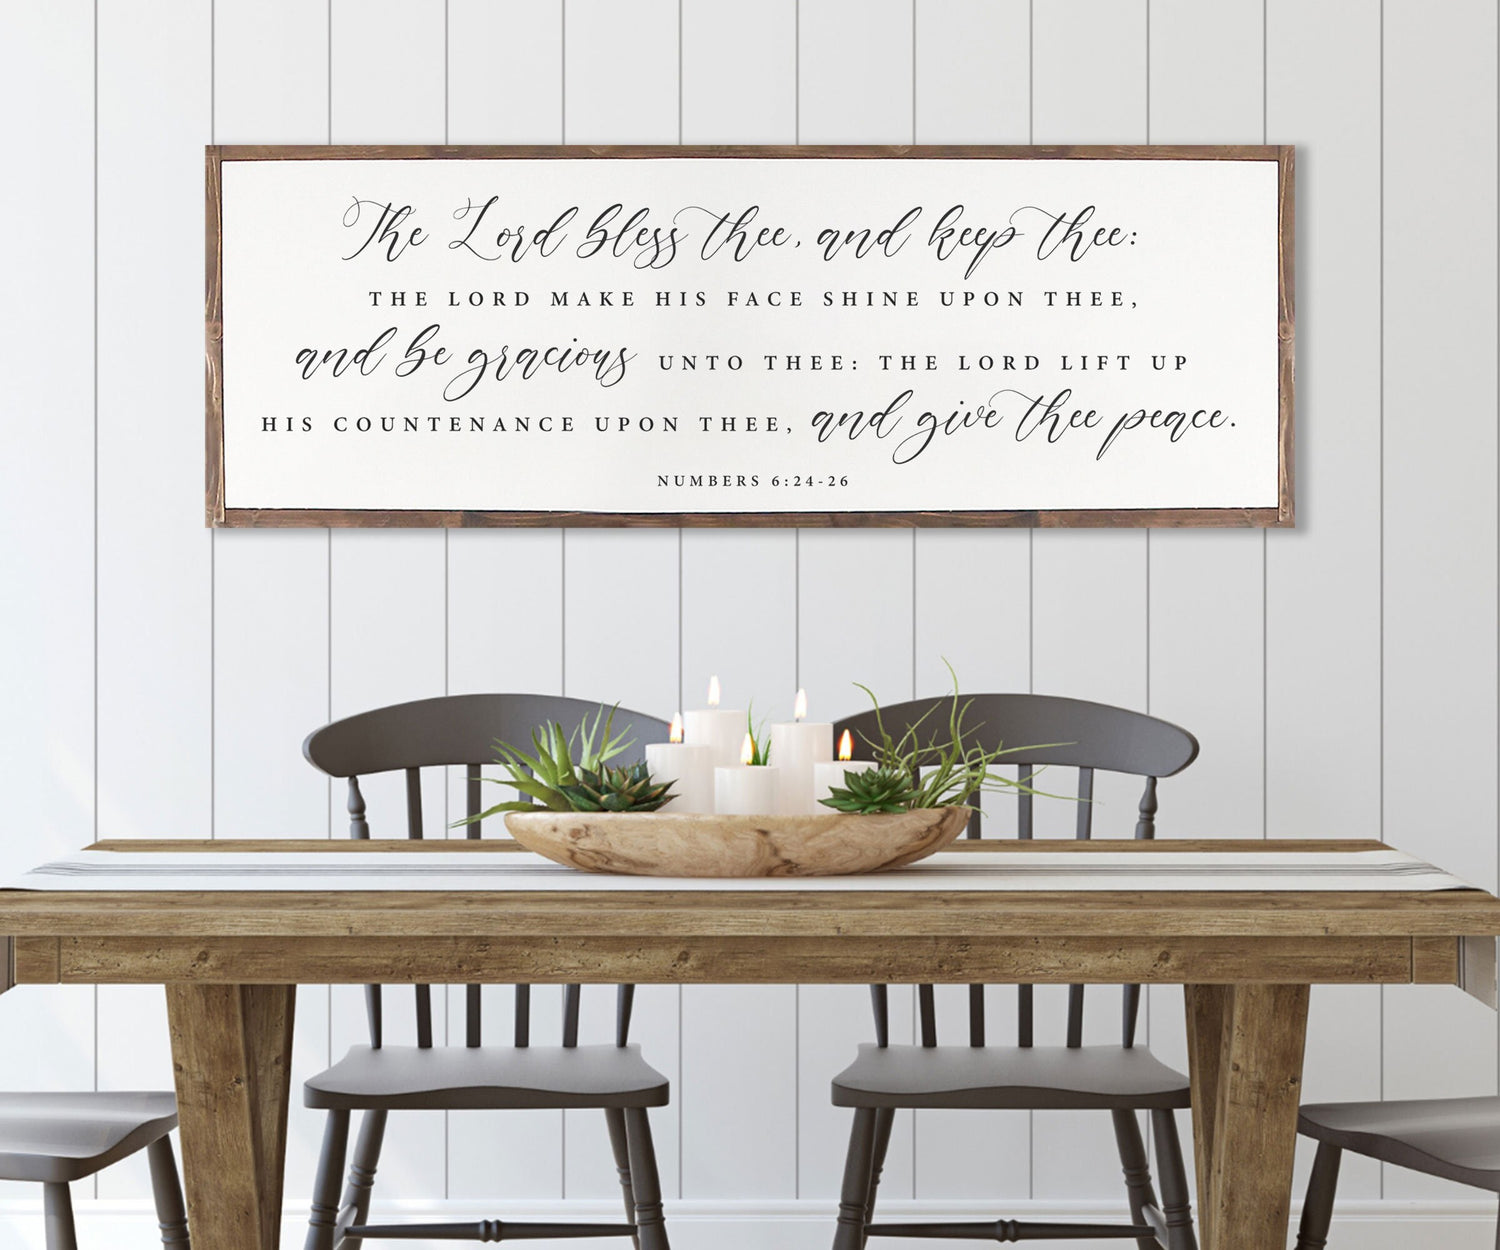 The Lord Bless Thee and Keep Thee |  Farmhouse Wood Sign | CHRISTIAN WALL ART | Scripture Wall Art |  Haggai 2:9 | The Blessing Wood Sign